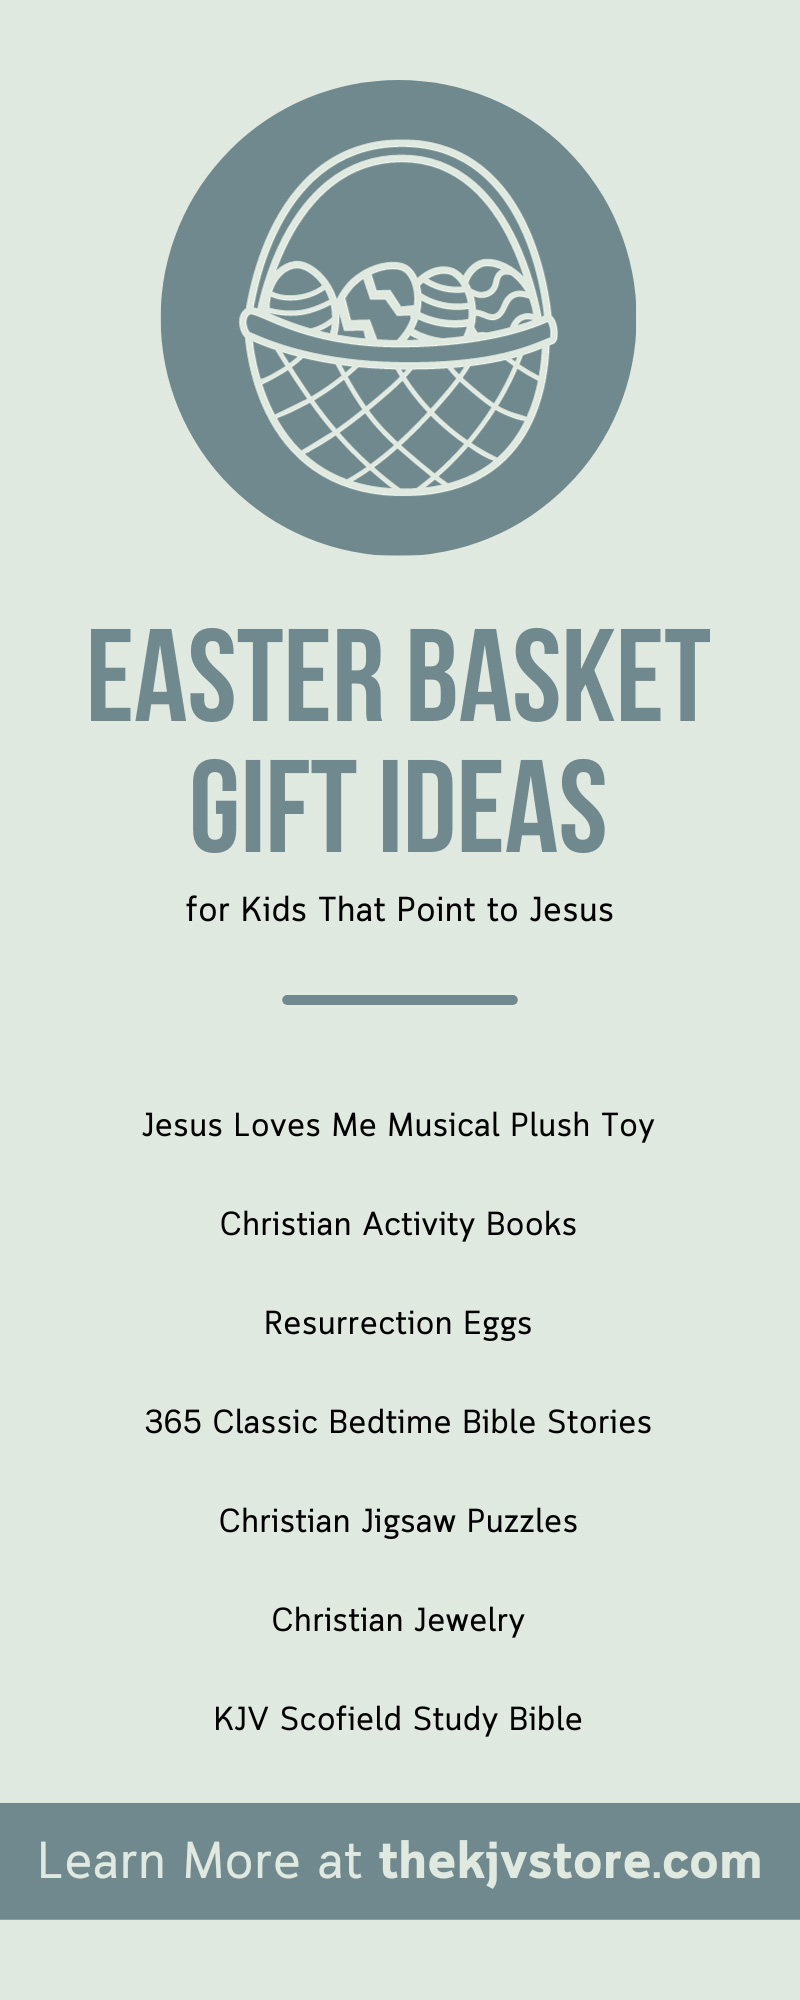 7 Easter Basket Gift Ideas for Kids That Point to Jesus